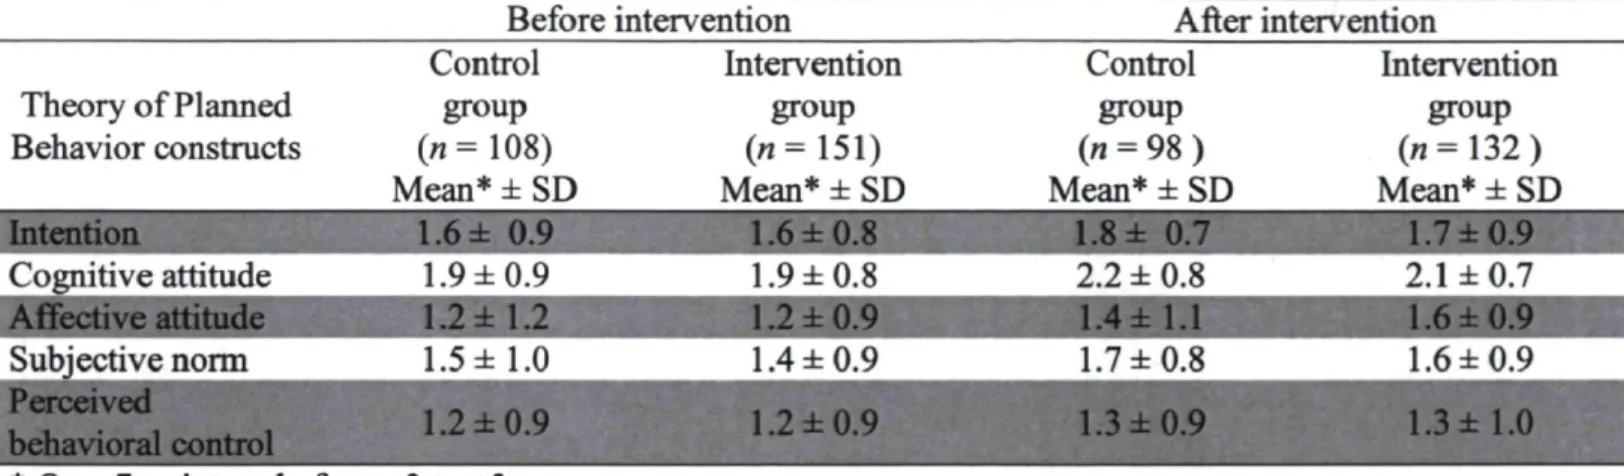 Table  2 - Mean score of the Theory of Planned Behavior constructs before and after DECISION+2  according to study groups  